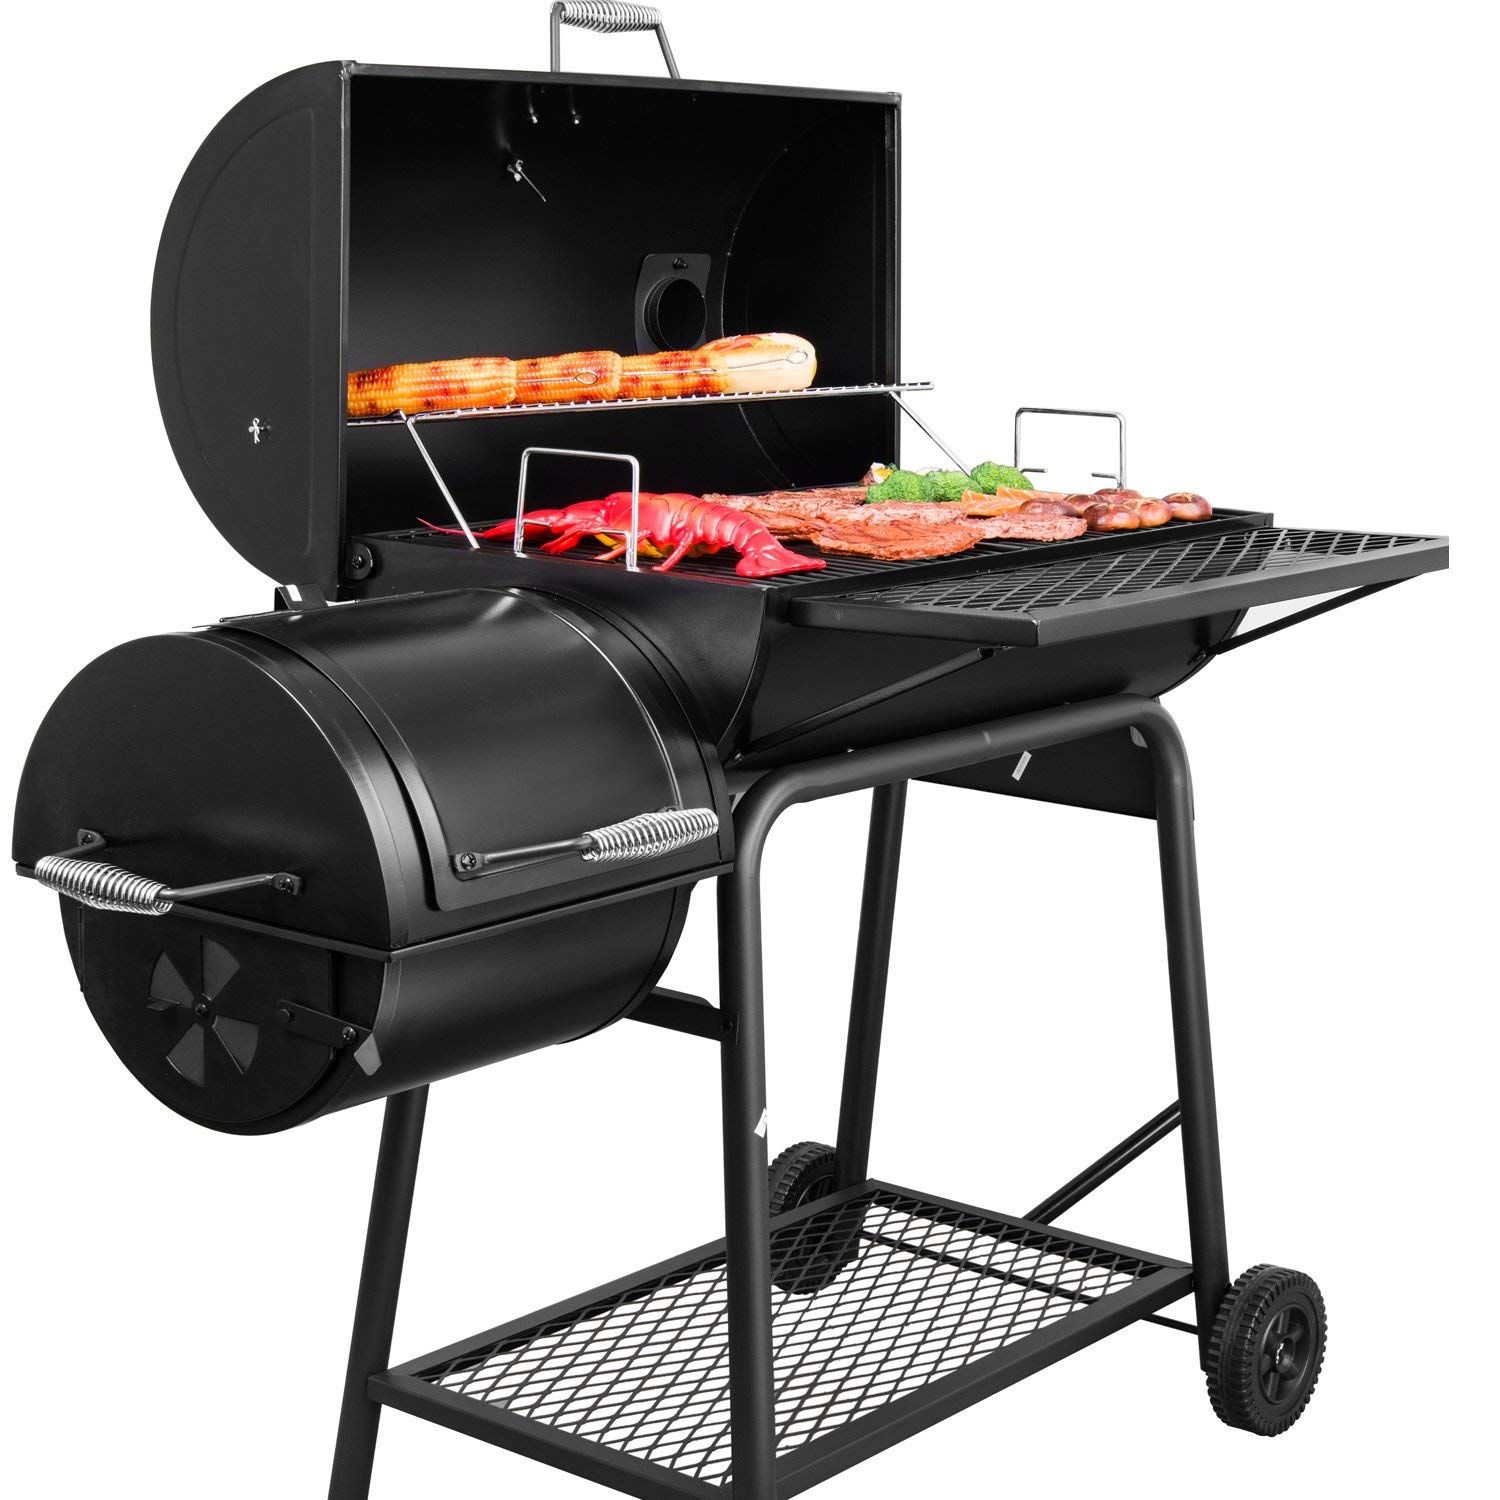 Propane To Gas BBQ - Buy Electric, Charcoal and Propane Grills At Best Prices